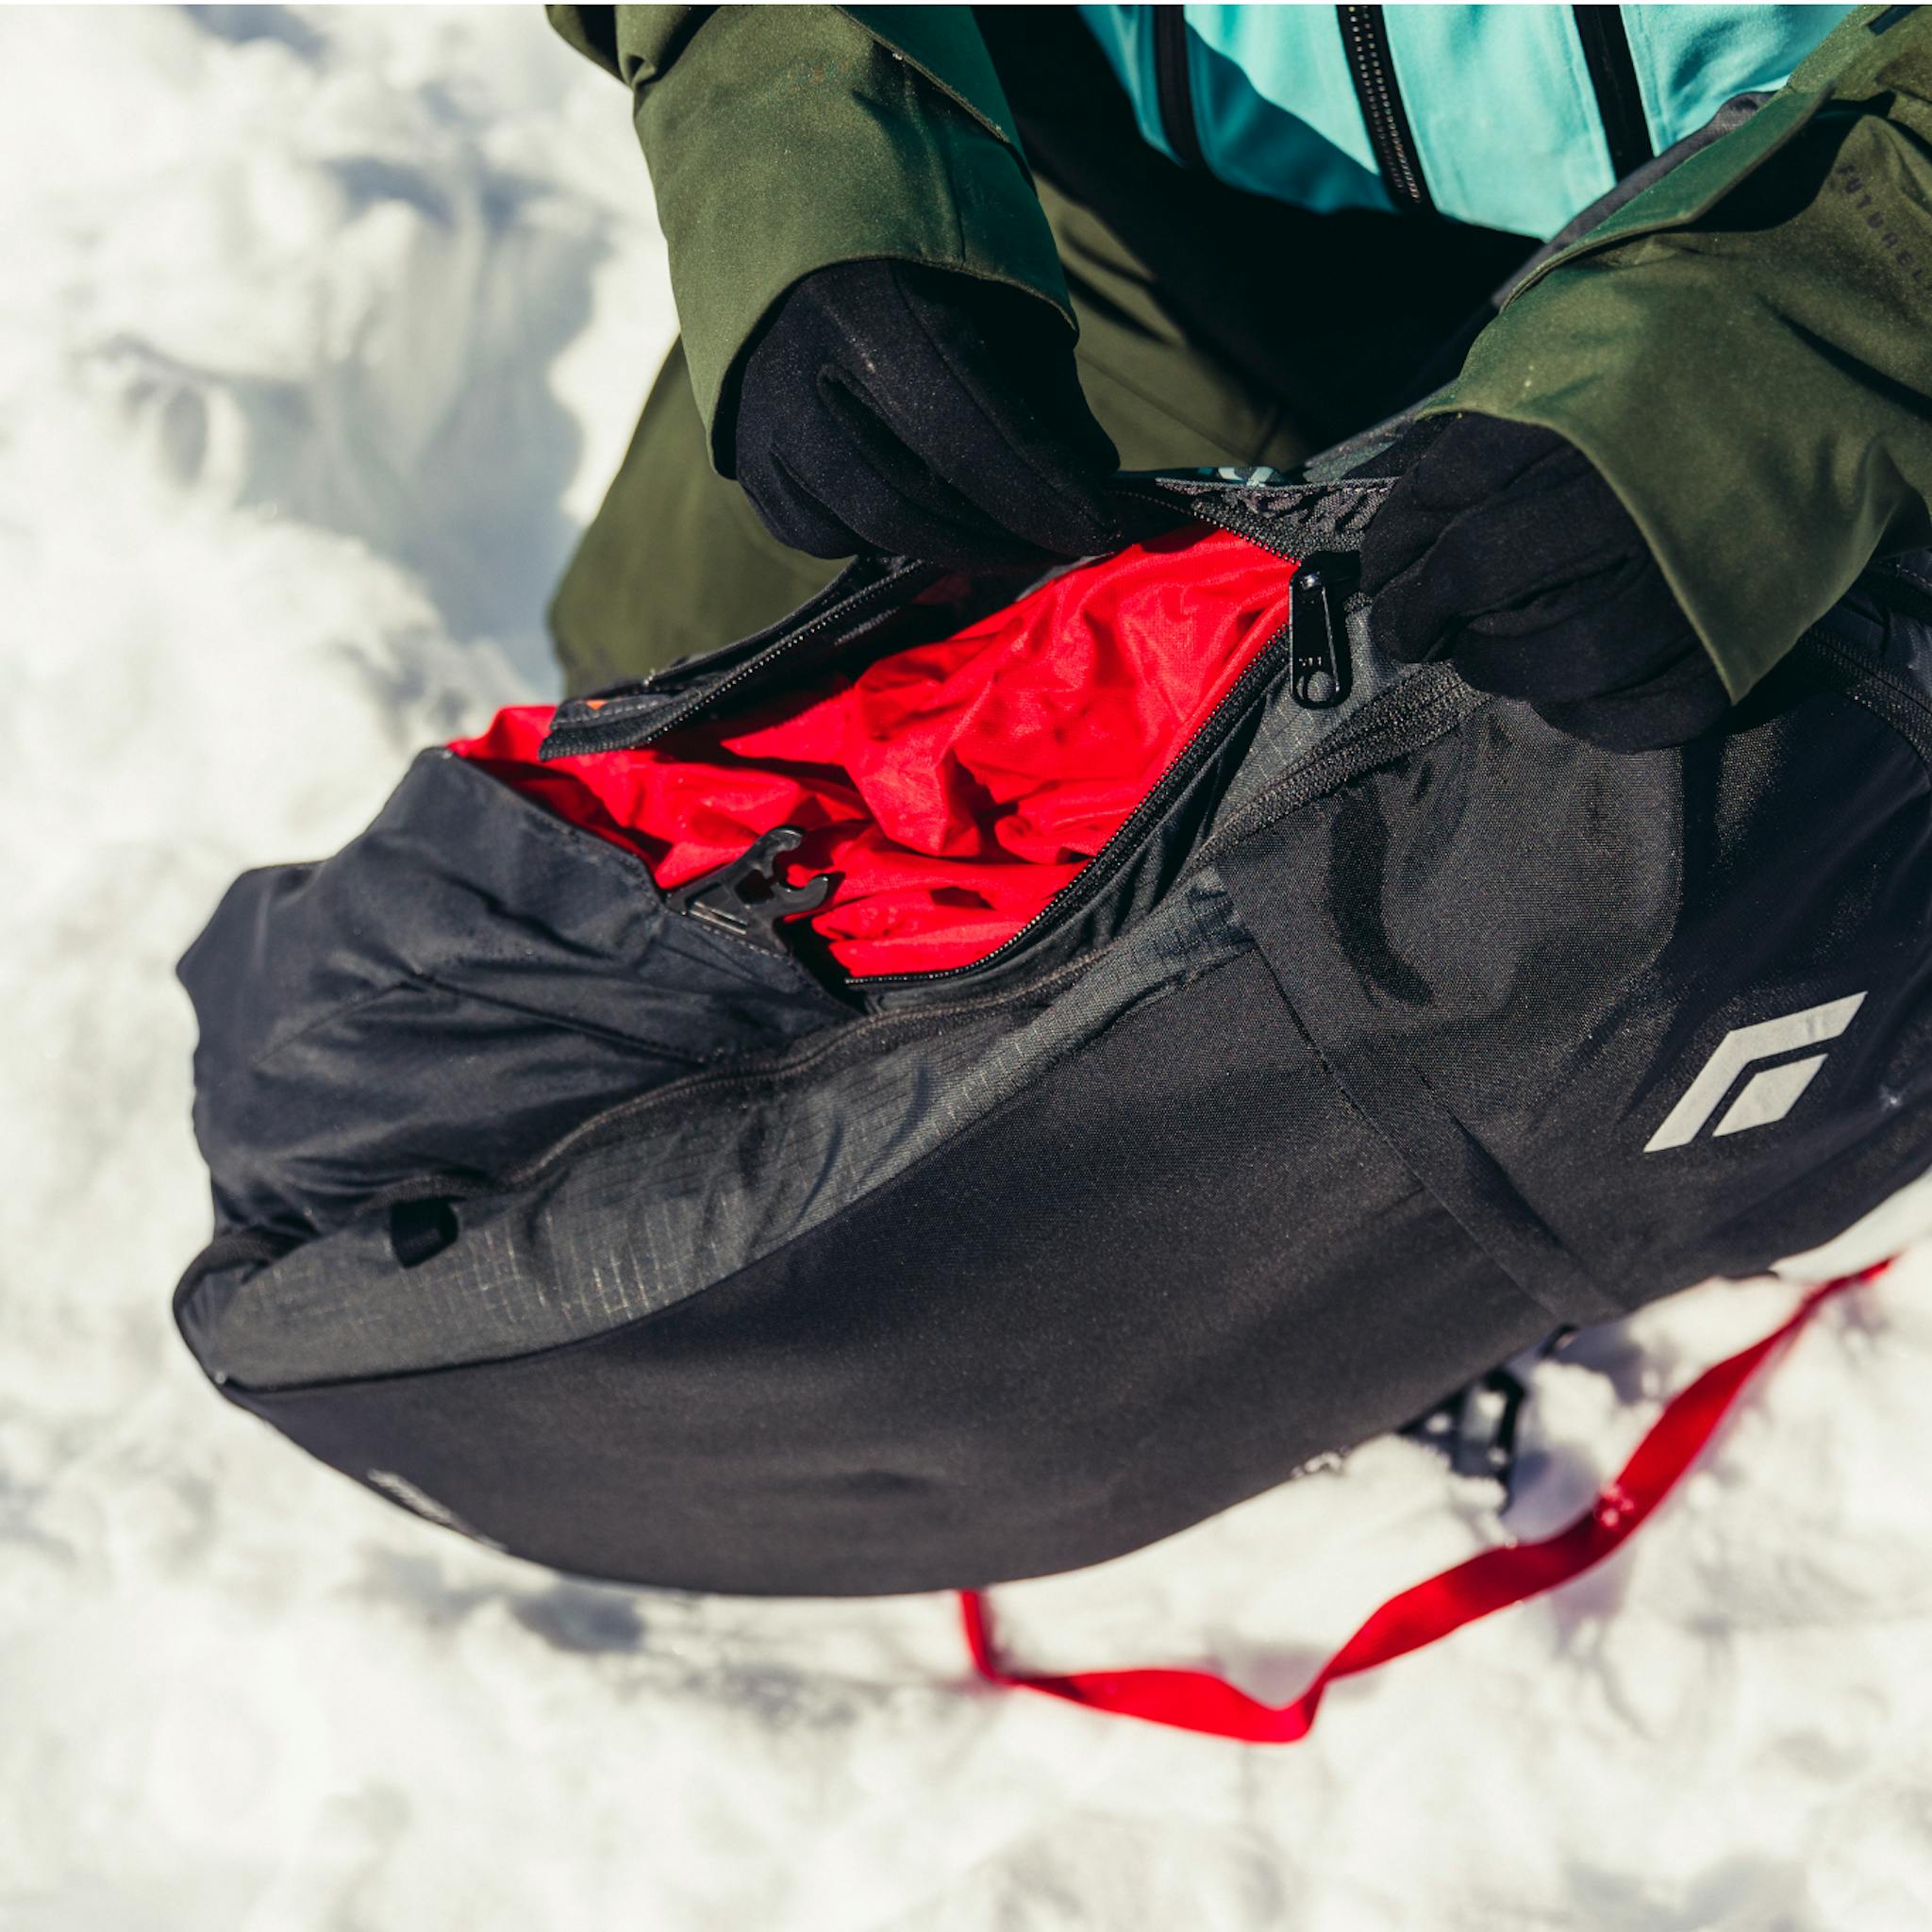 A skier packs the jetforce airbag back into the pack.